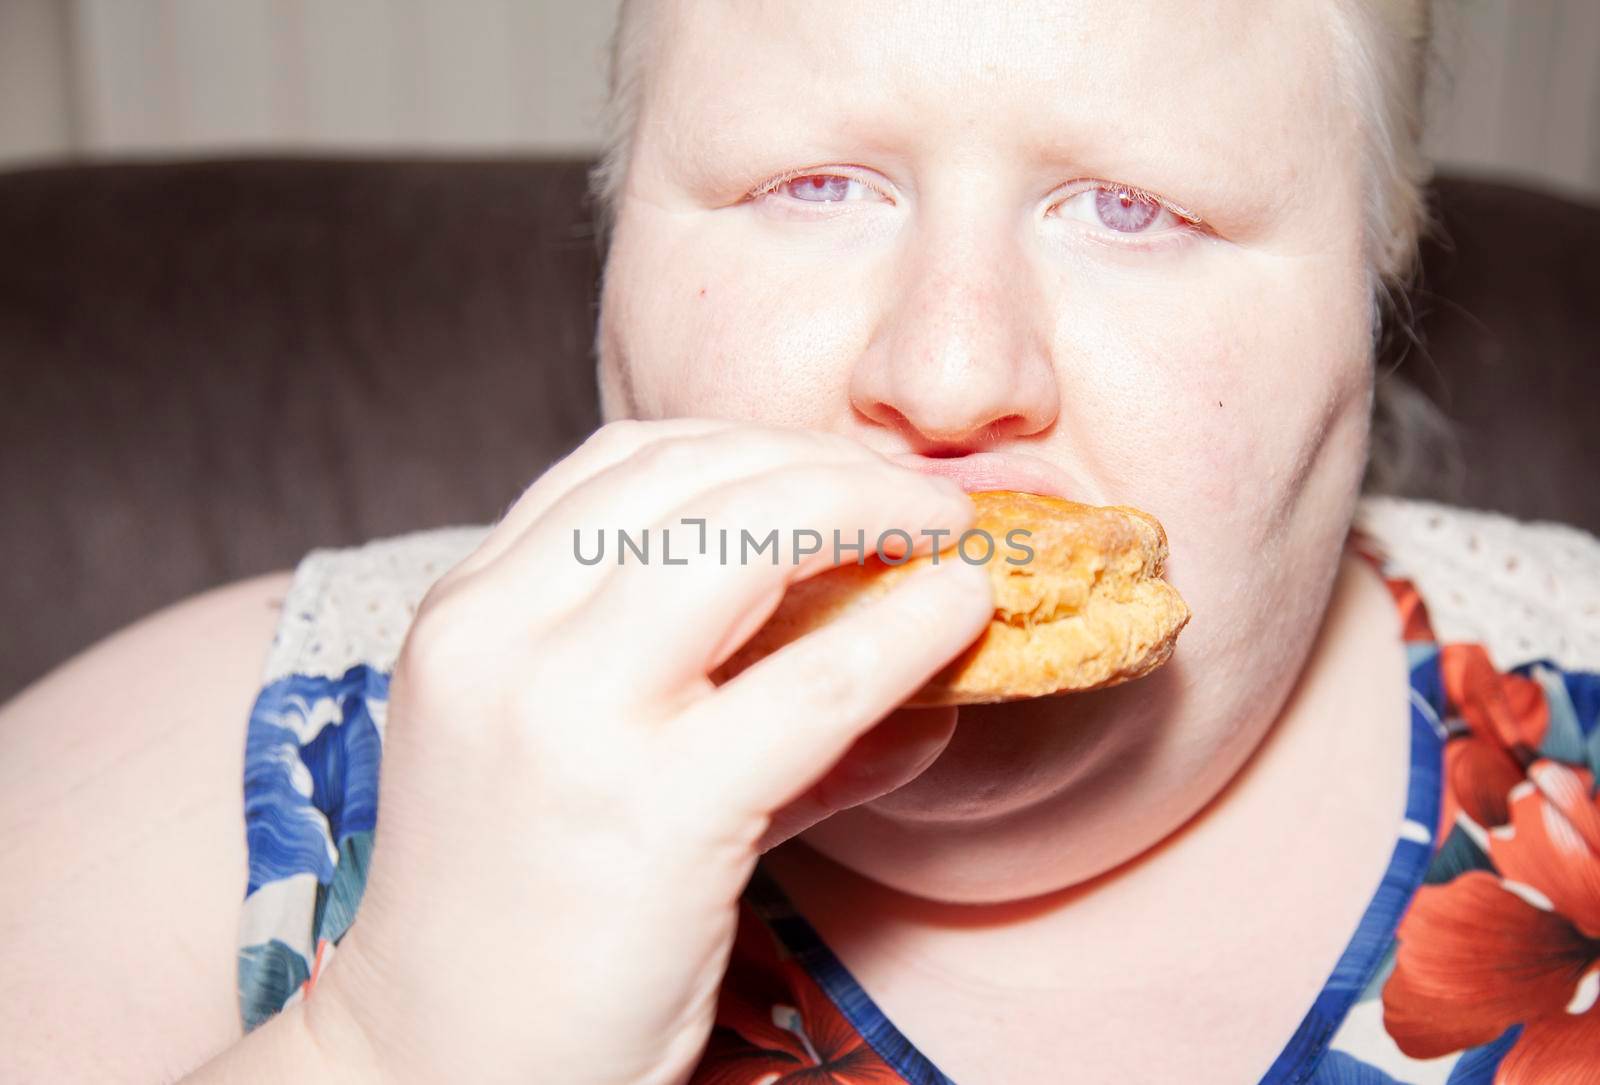 Woman Eating Buttermilk Biscuit by tornado98